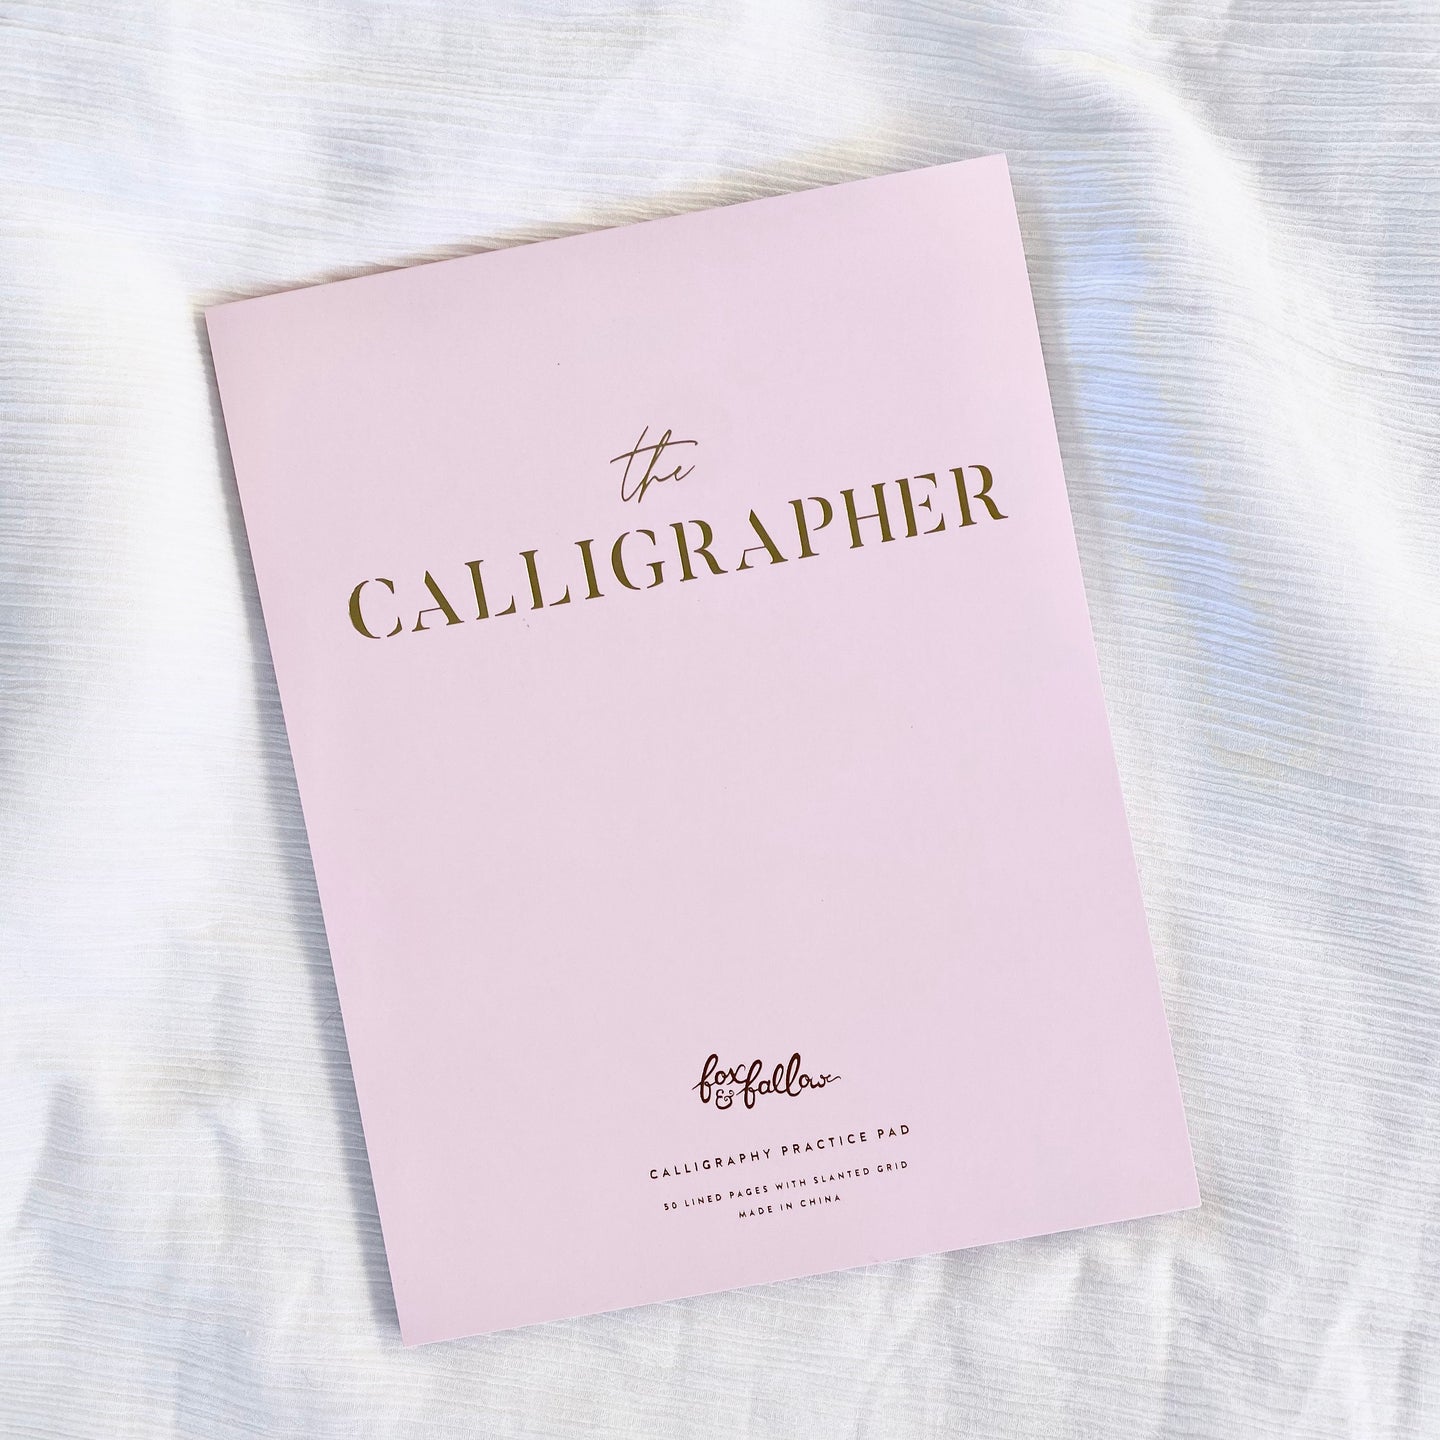 'The Calligrapher' White Practice Pad by Fox & Fallow